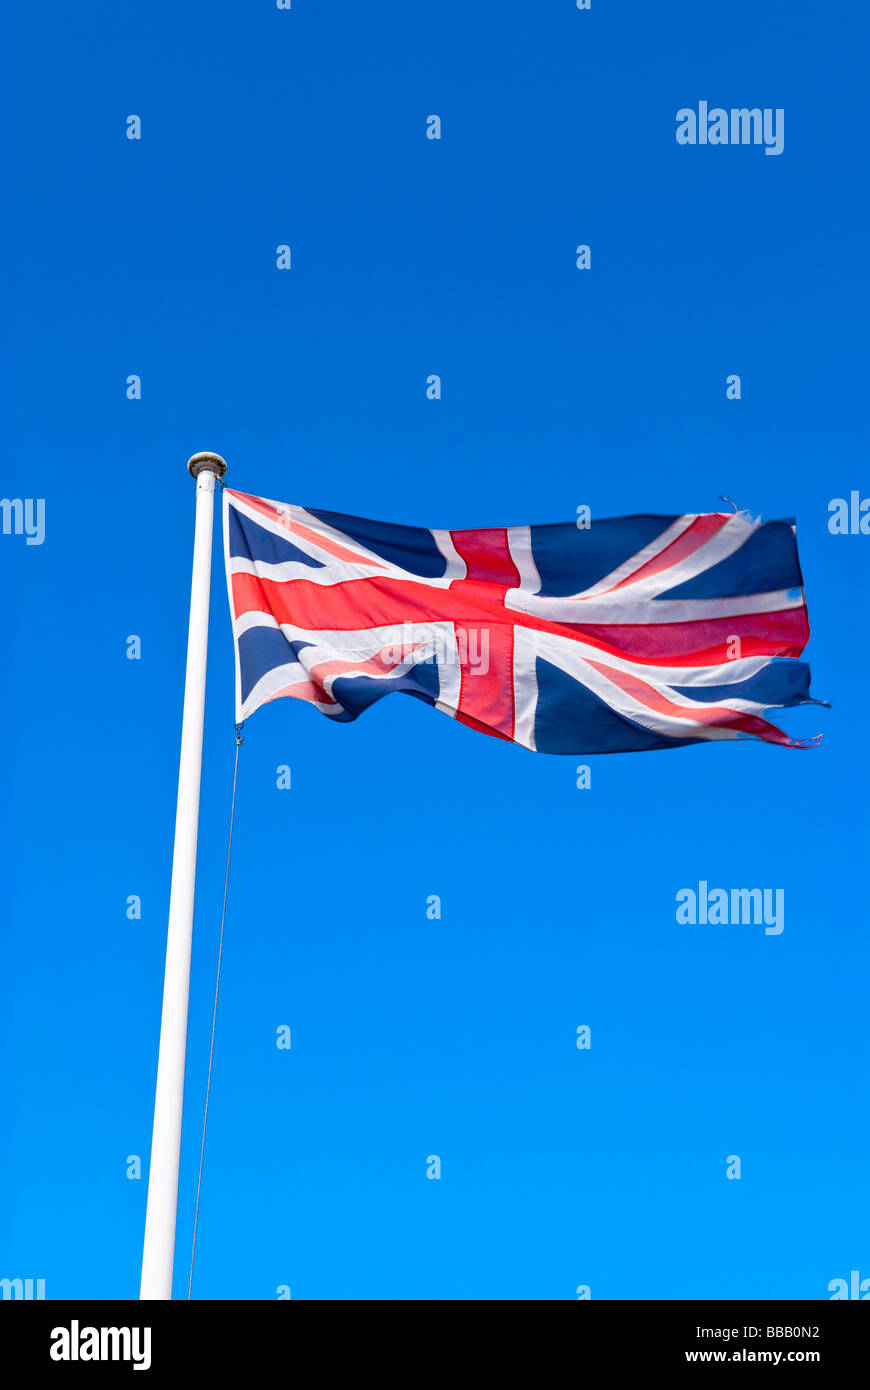 A union jack flag of England in the Uk Stock Photo